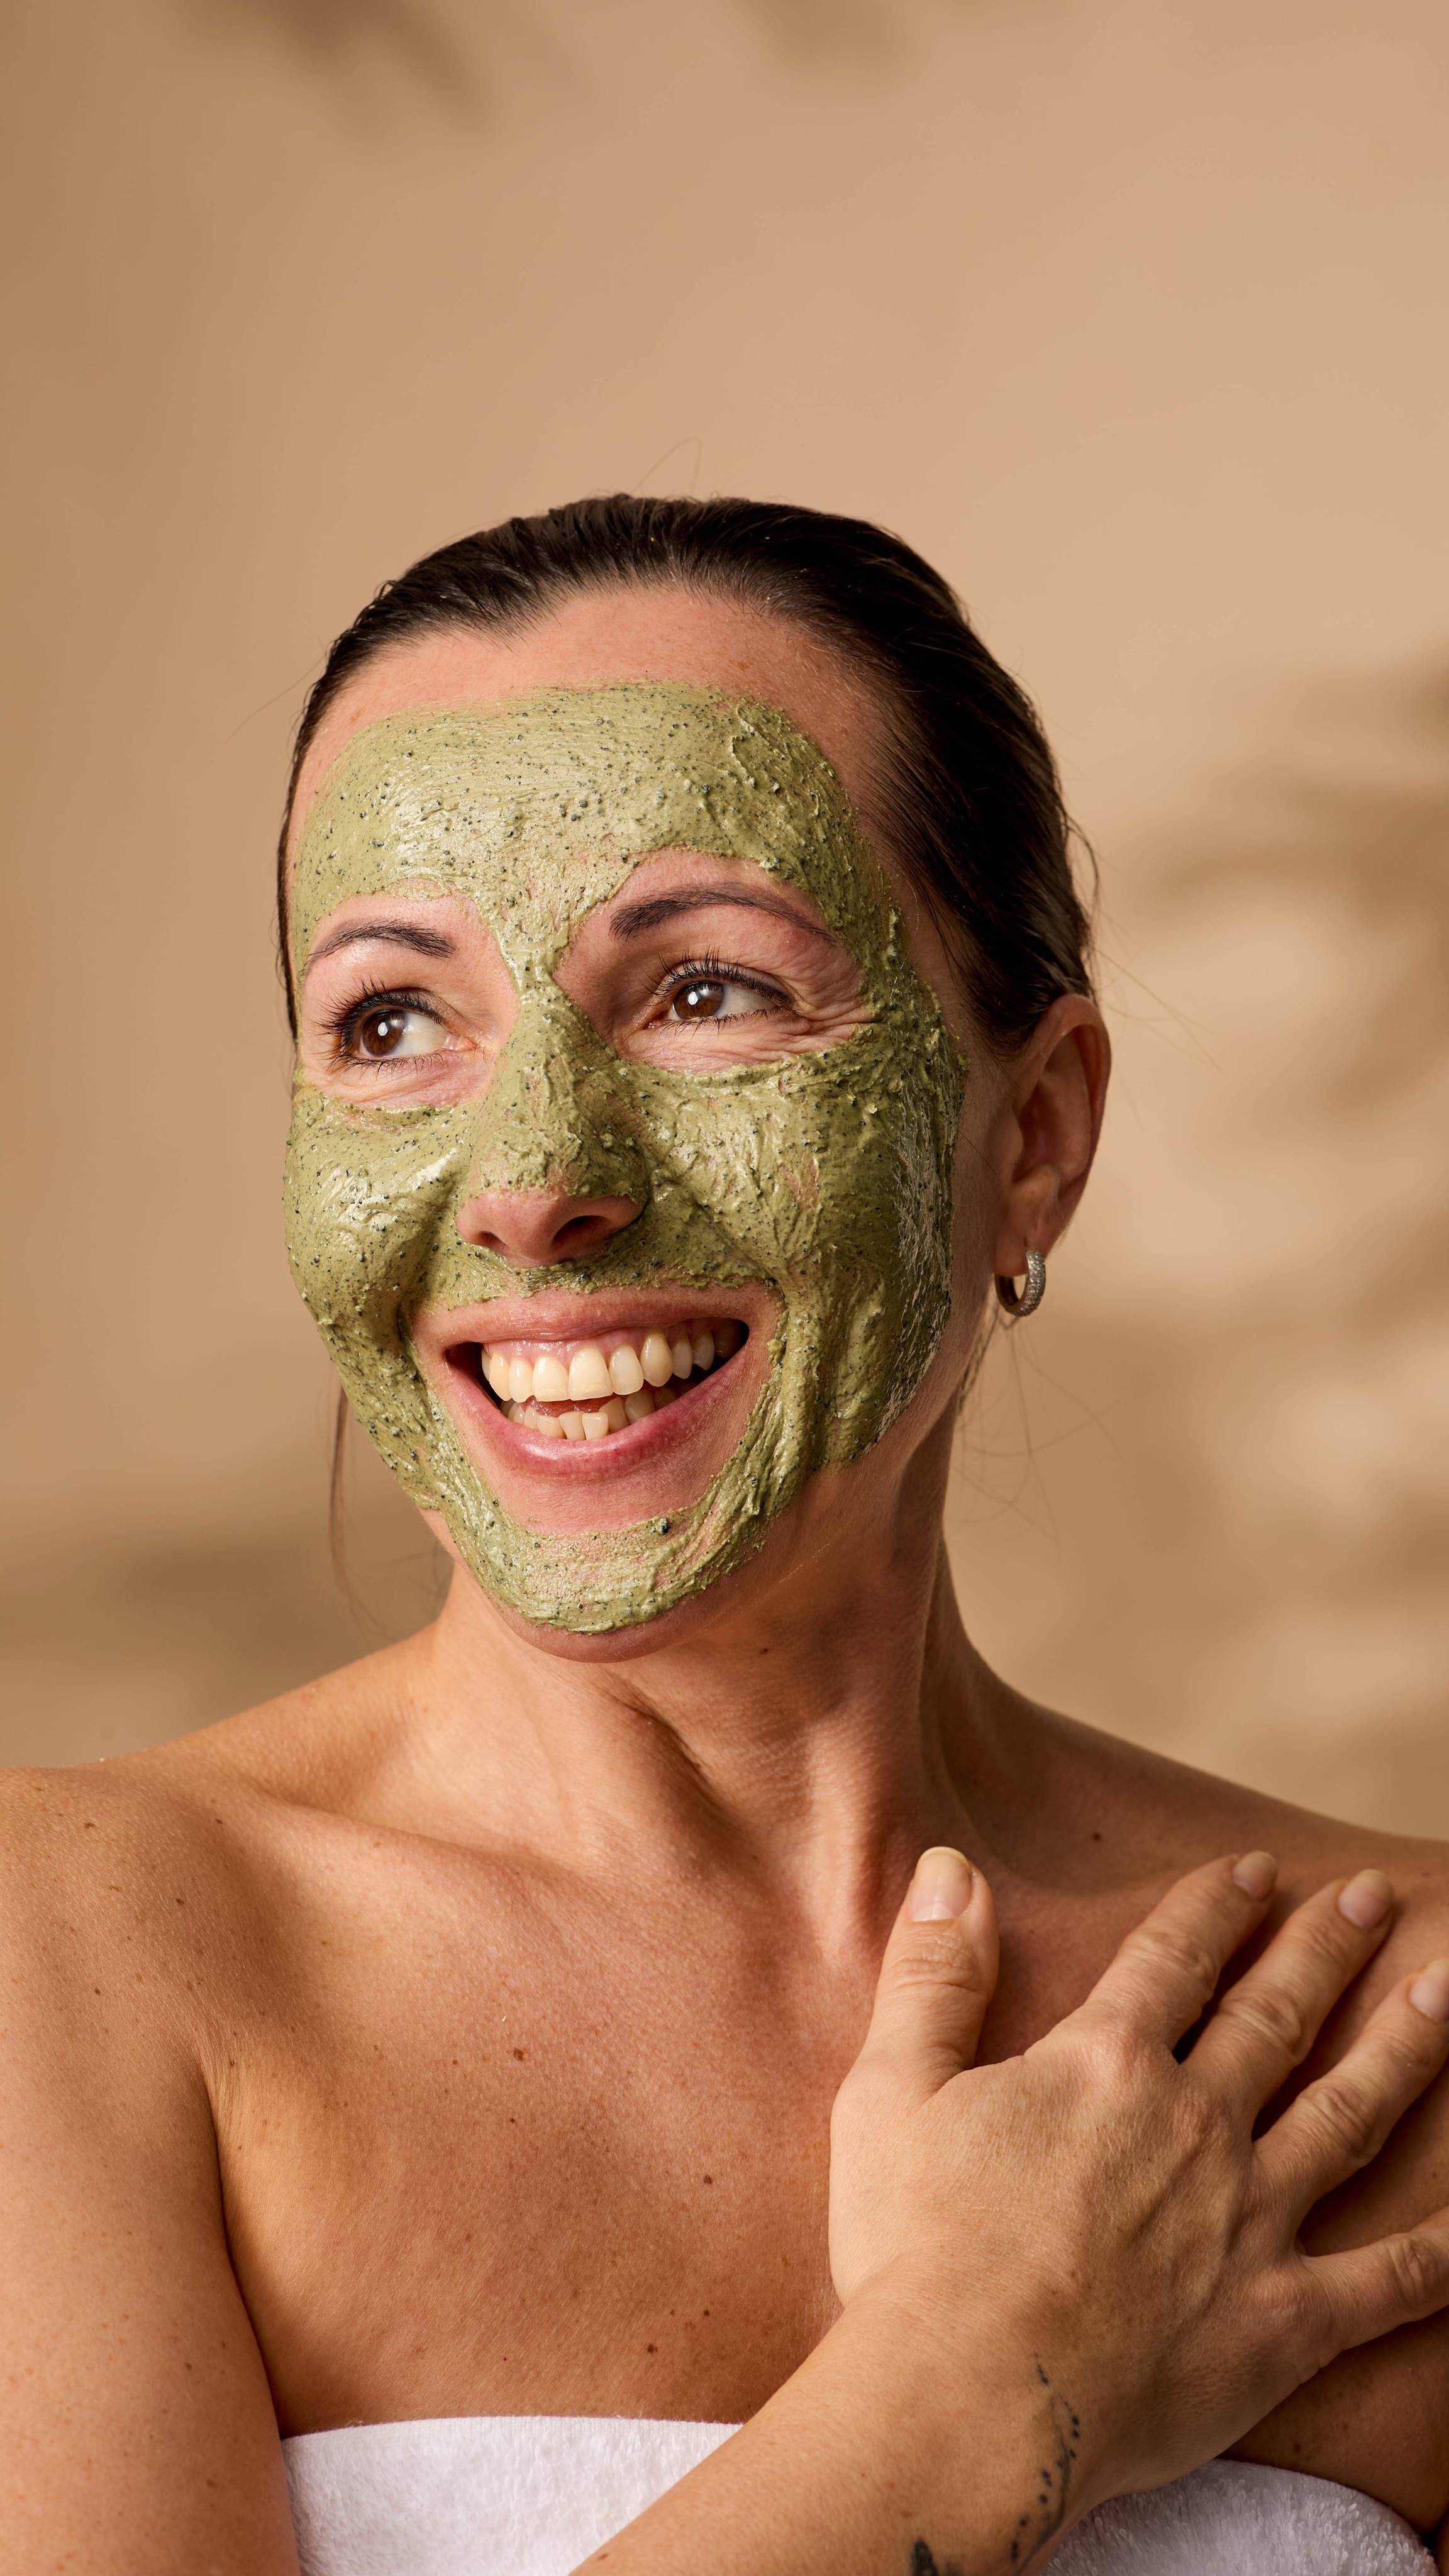 The model is wrapped in a fluffy white towel and their face is evenly covered in the Matcha face mask. 